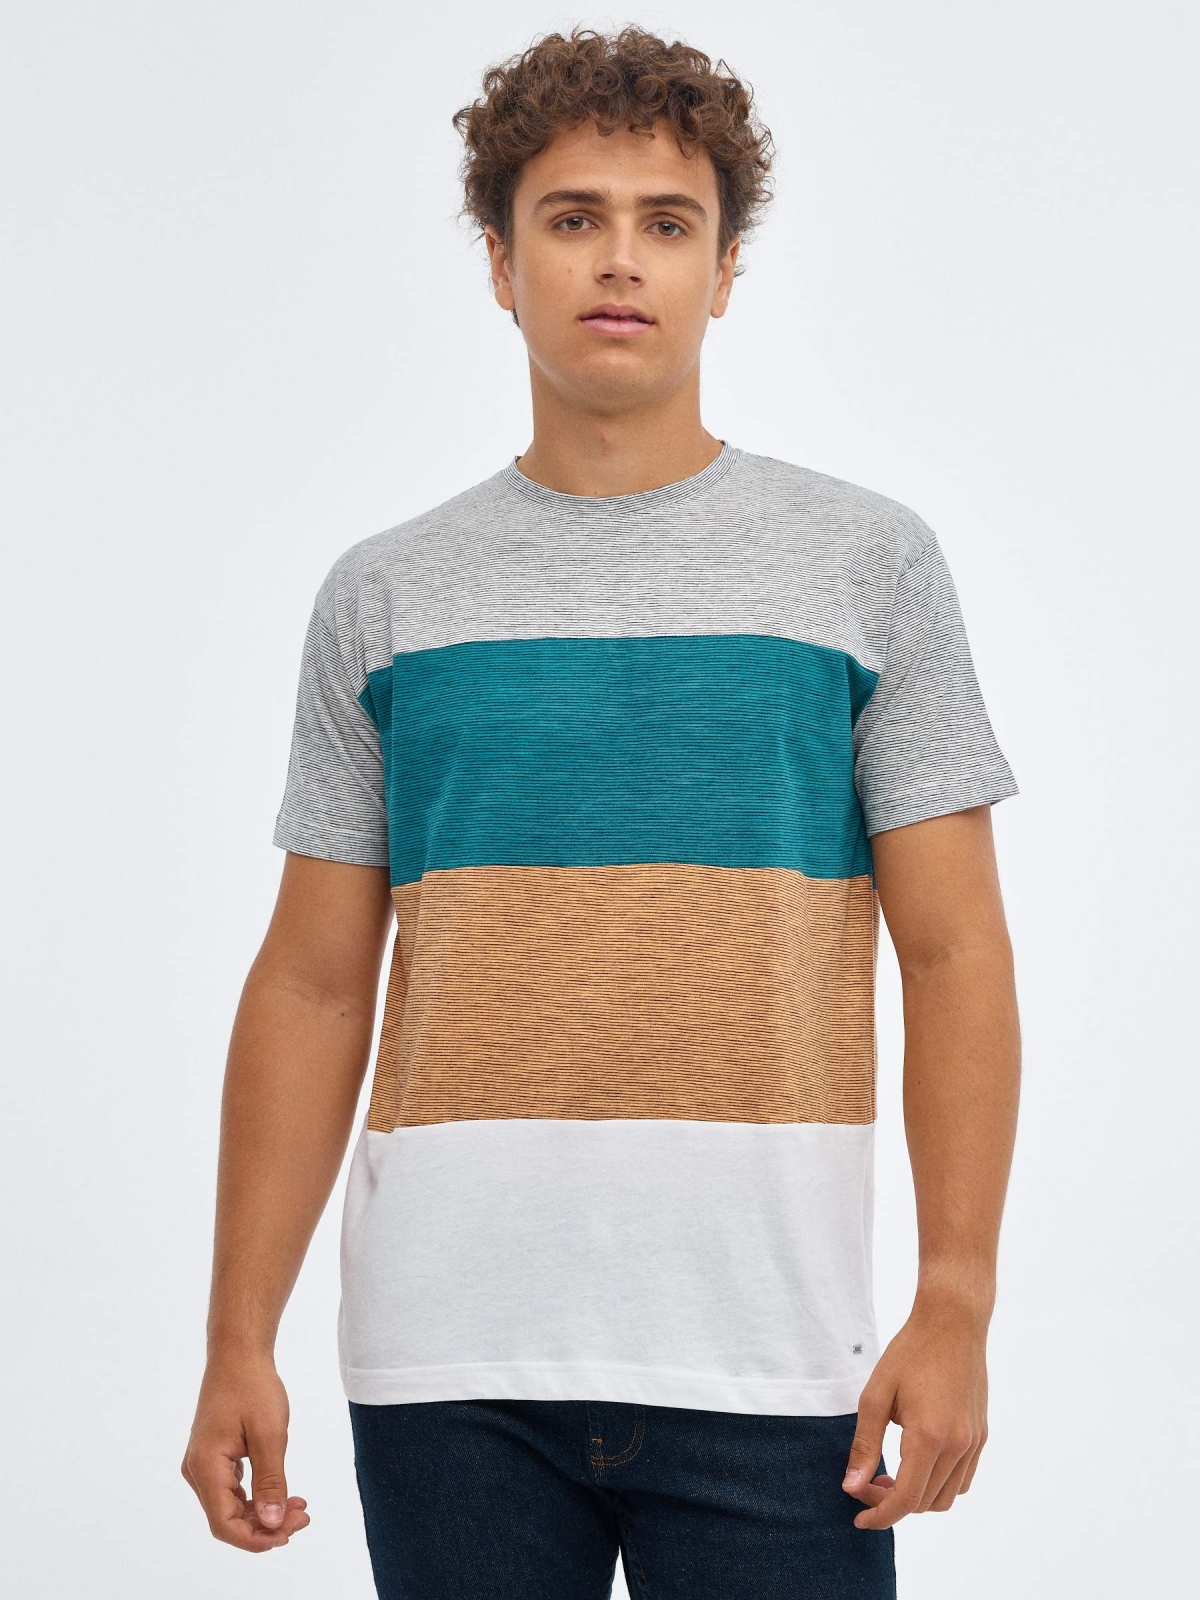 Block coloured striped T-shirt grey middle front view